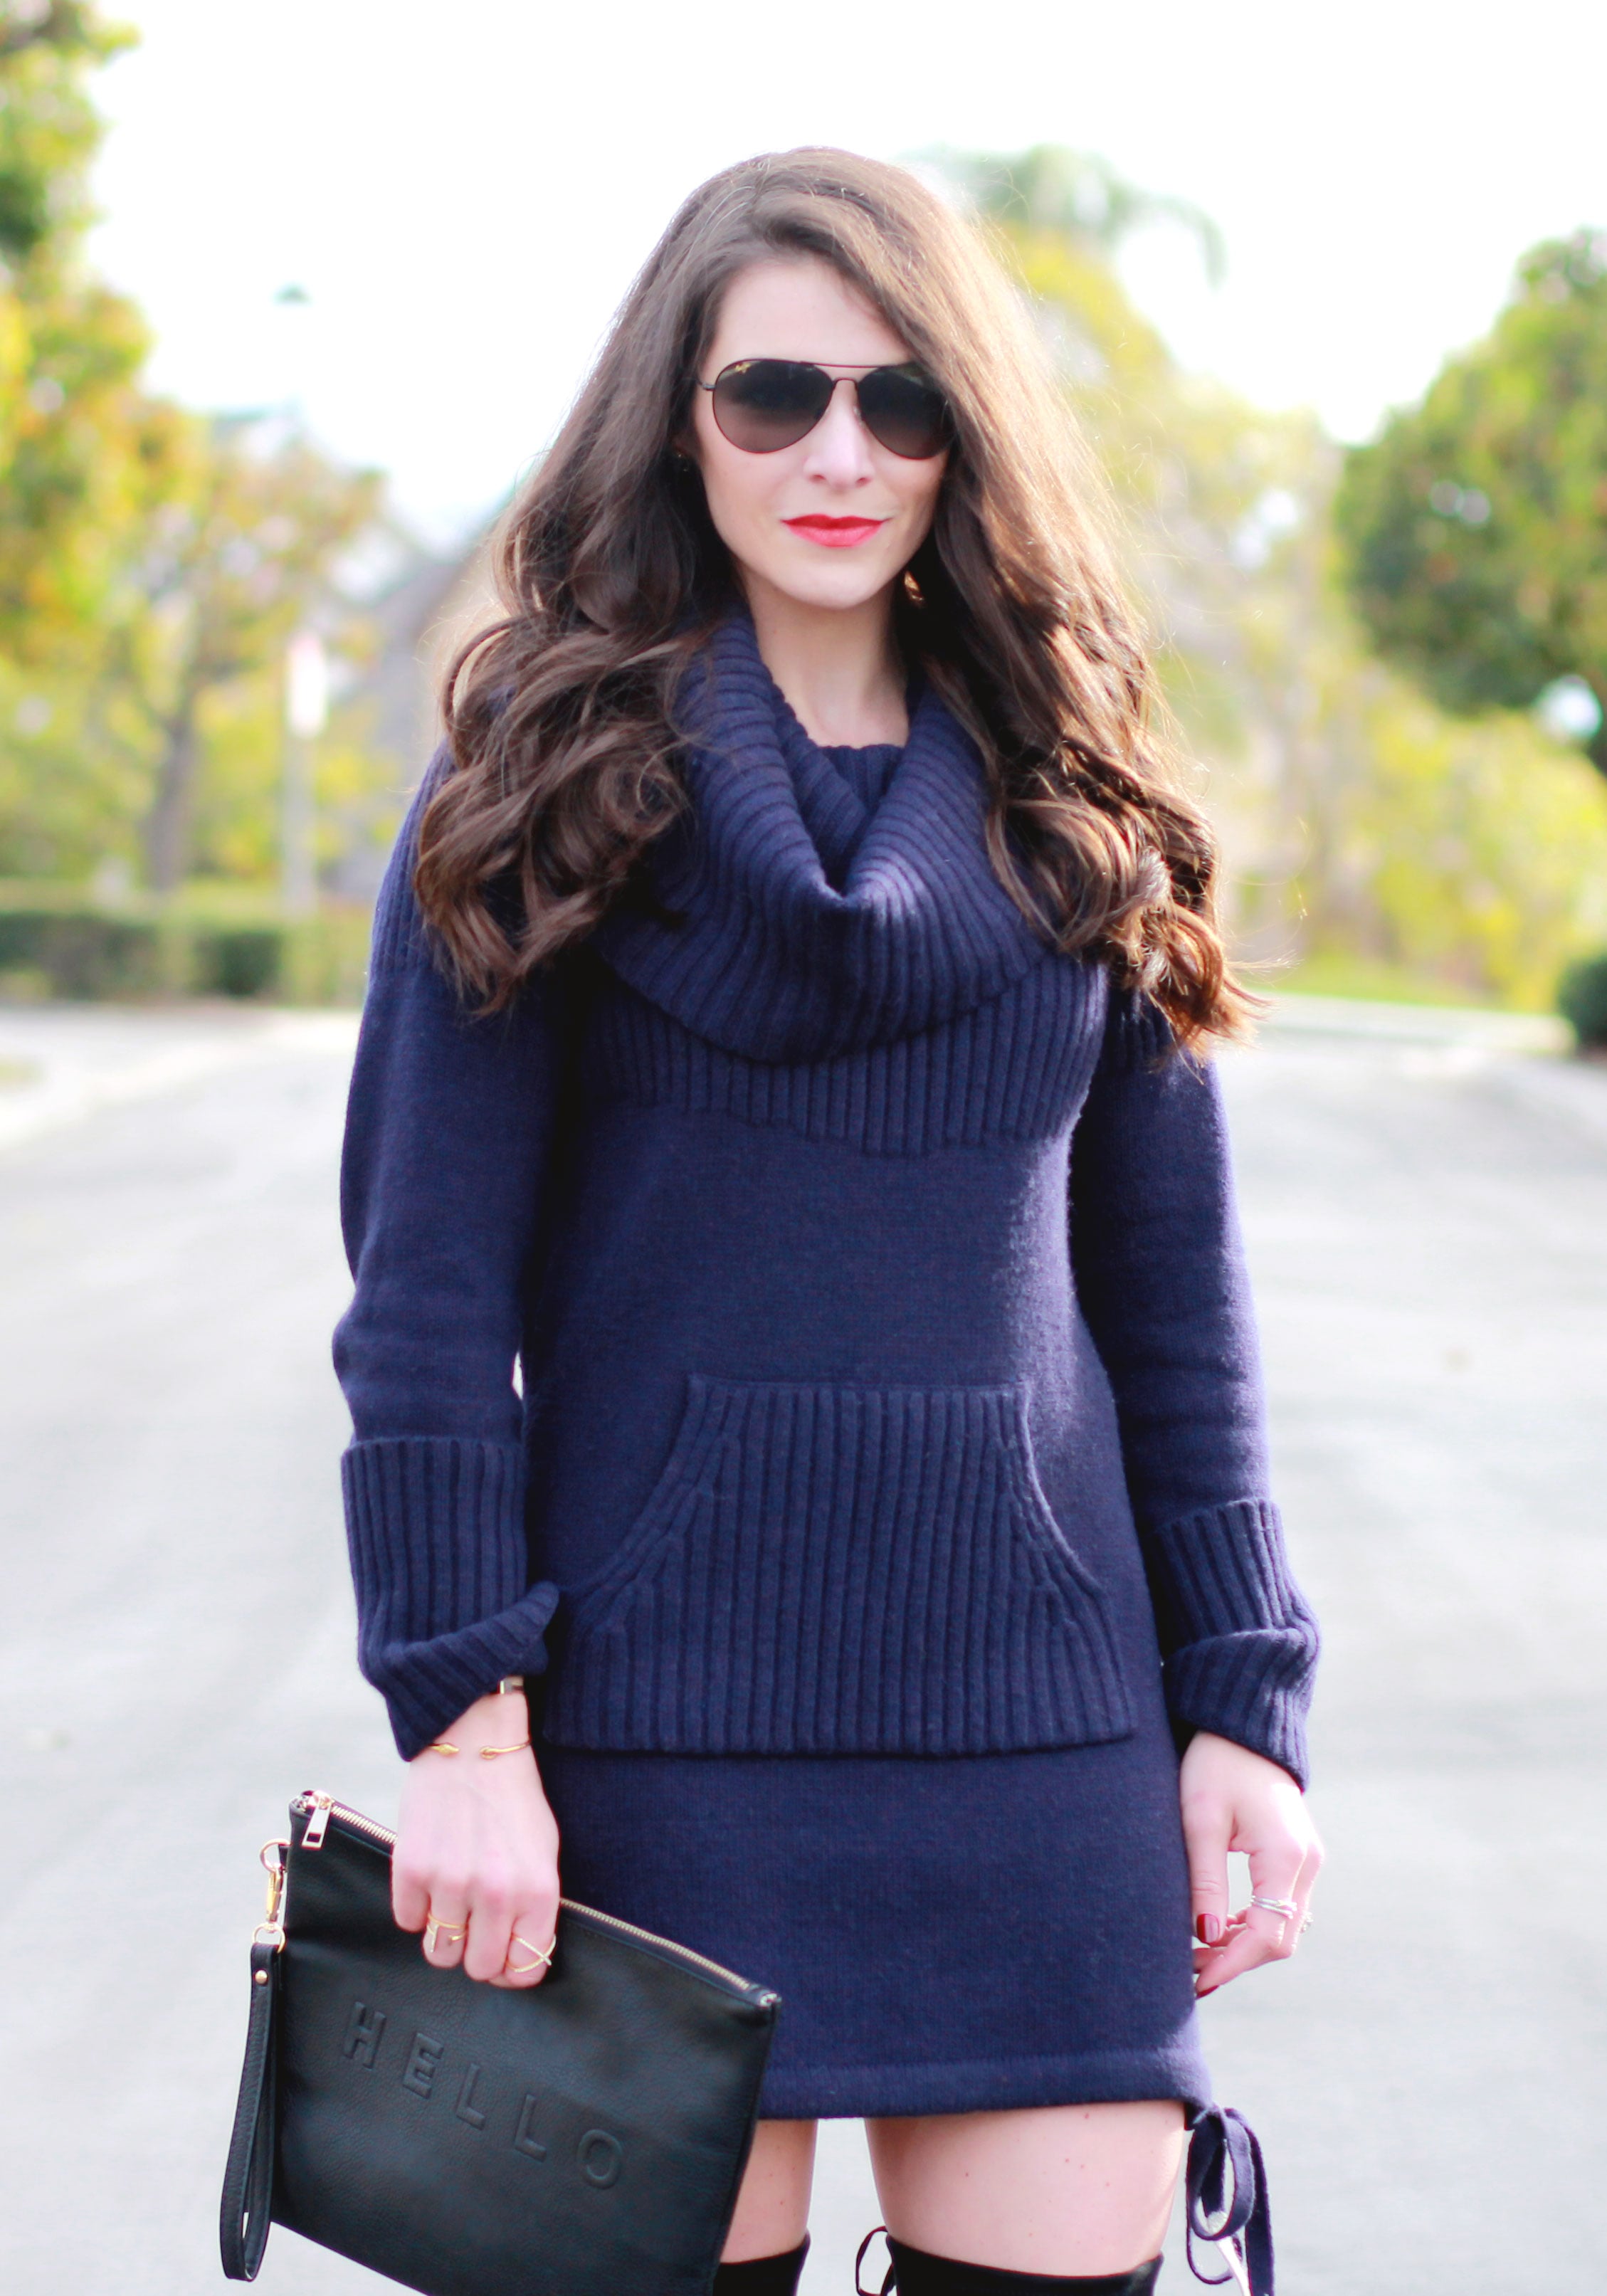 Winter Outfit, Fashion Blogger, Navy Sweater Dress, Steve Madden Gorgeous Over The Knee Boots, Cowl Neck, Sole Society 'Justine' Hello Goodbye Oversize Clutch